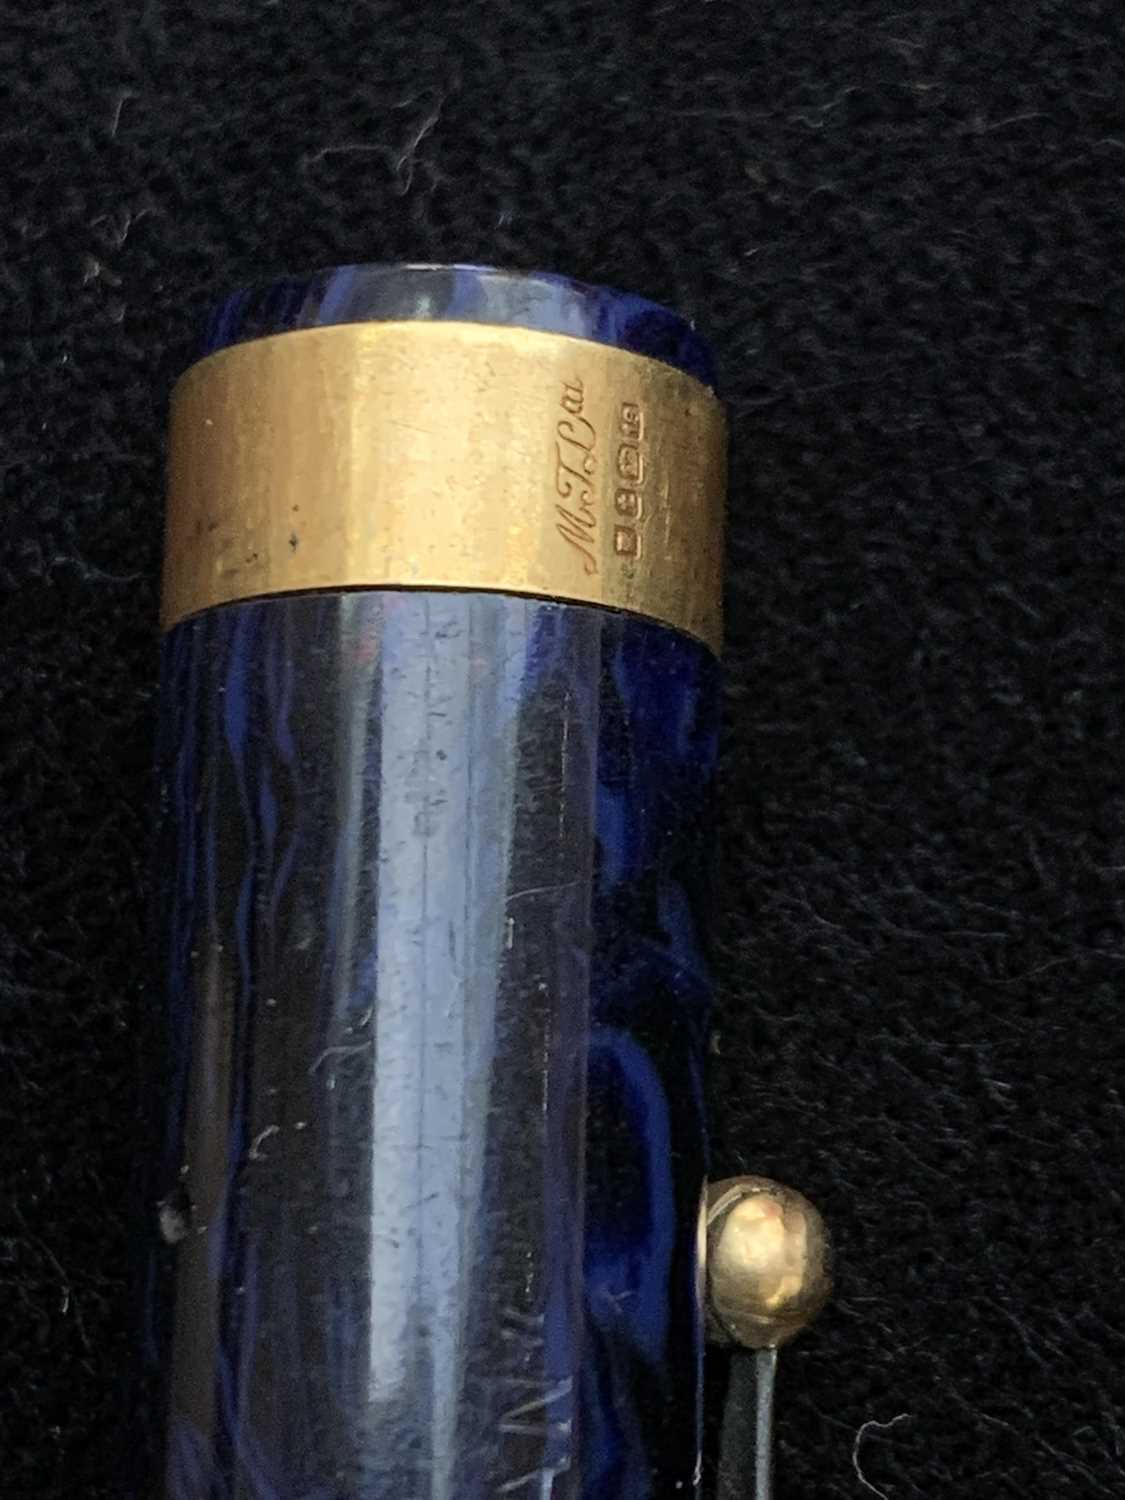 A Swan Mabie Todd L 470/52 Blue/Black,Marble Leverless fountain pen with size 4 14ct gold nib. The - Image 11 of 11